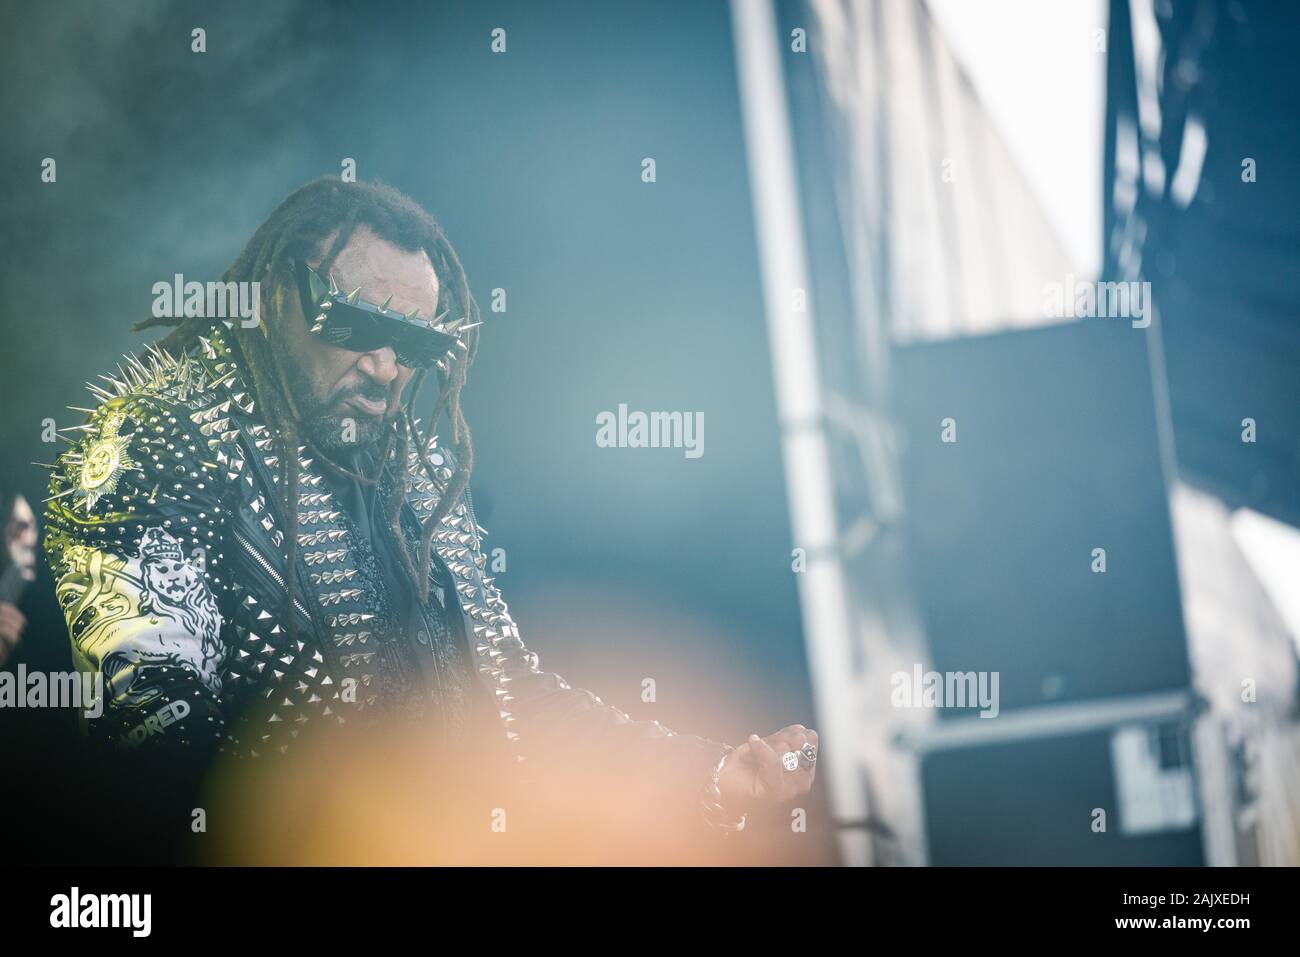 Copenhagen, Denmark - June 20th, 2019. The Welsh metal band Skindred performs a live concert during the Danish heavy metal festival Copenhell 2019 in Copenhagen. Here vocalist Benji Webbe is seen live on stage. (Photo credit: Gonzales Photo - Mathias Kristensen). Stock Photo